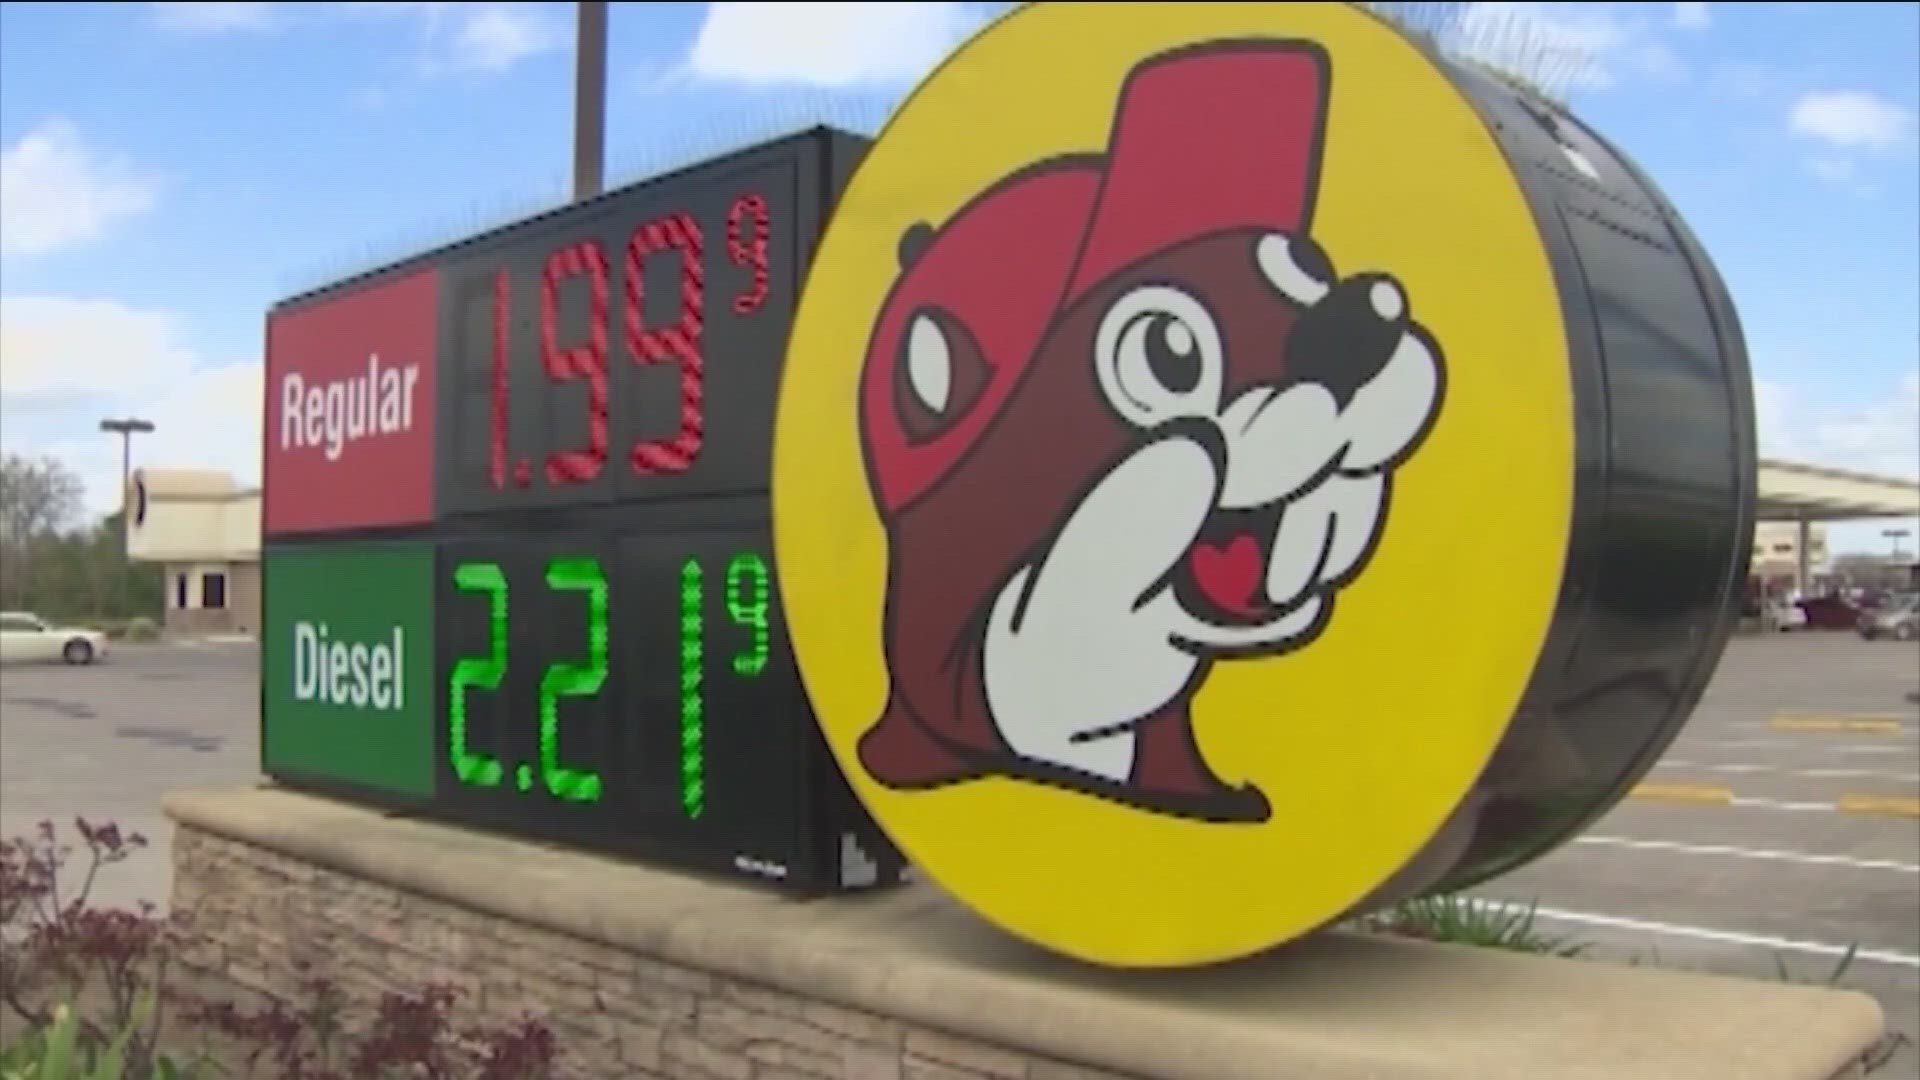 Business Insider recently ranked Buc-ee's among the top paying entry-level jobs in the country.